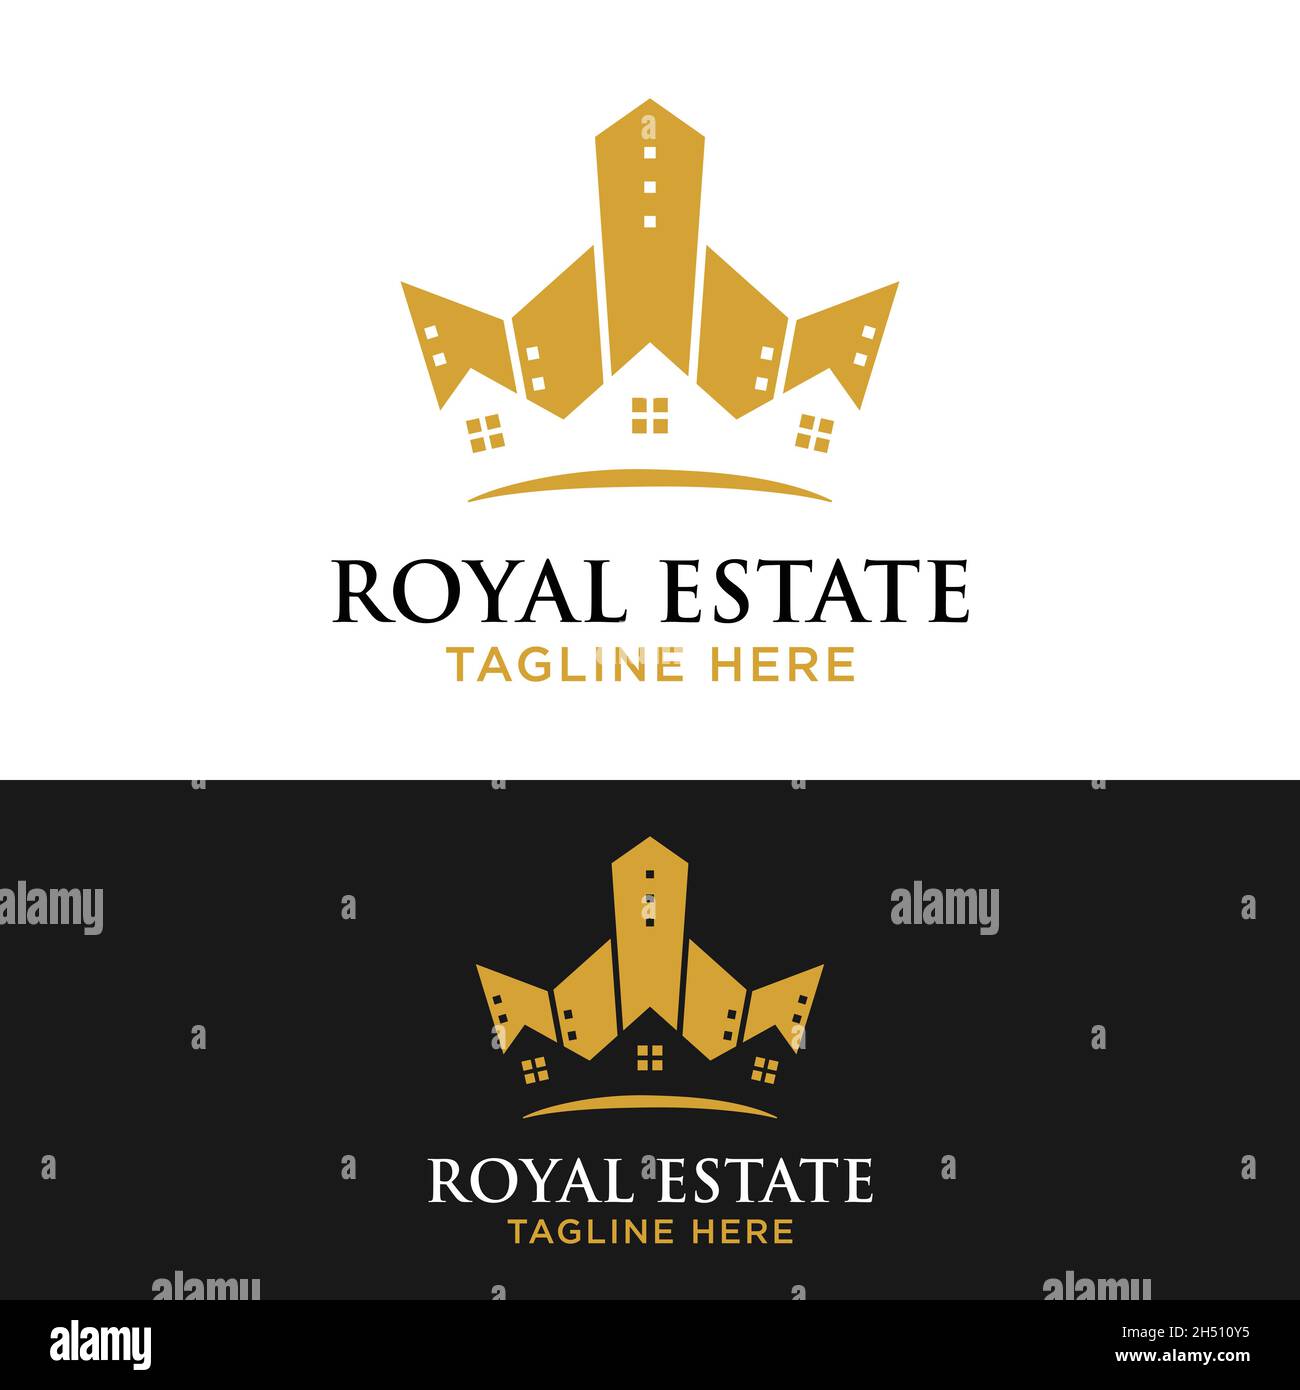 Crown Building for Royal Estate Logo Design Template. Suitable for Real Estate Realty Realtor Properties Mortgage Construction Development Etc. Stock Vector